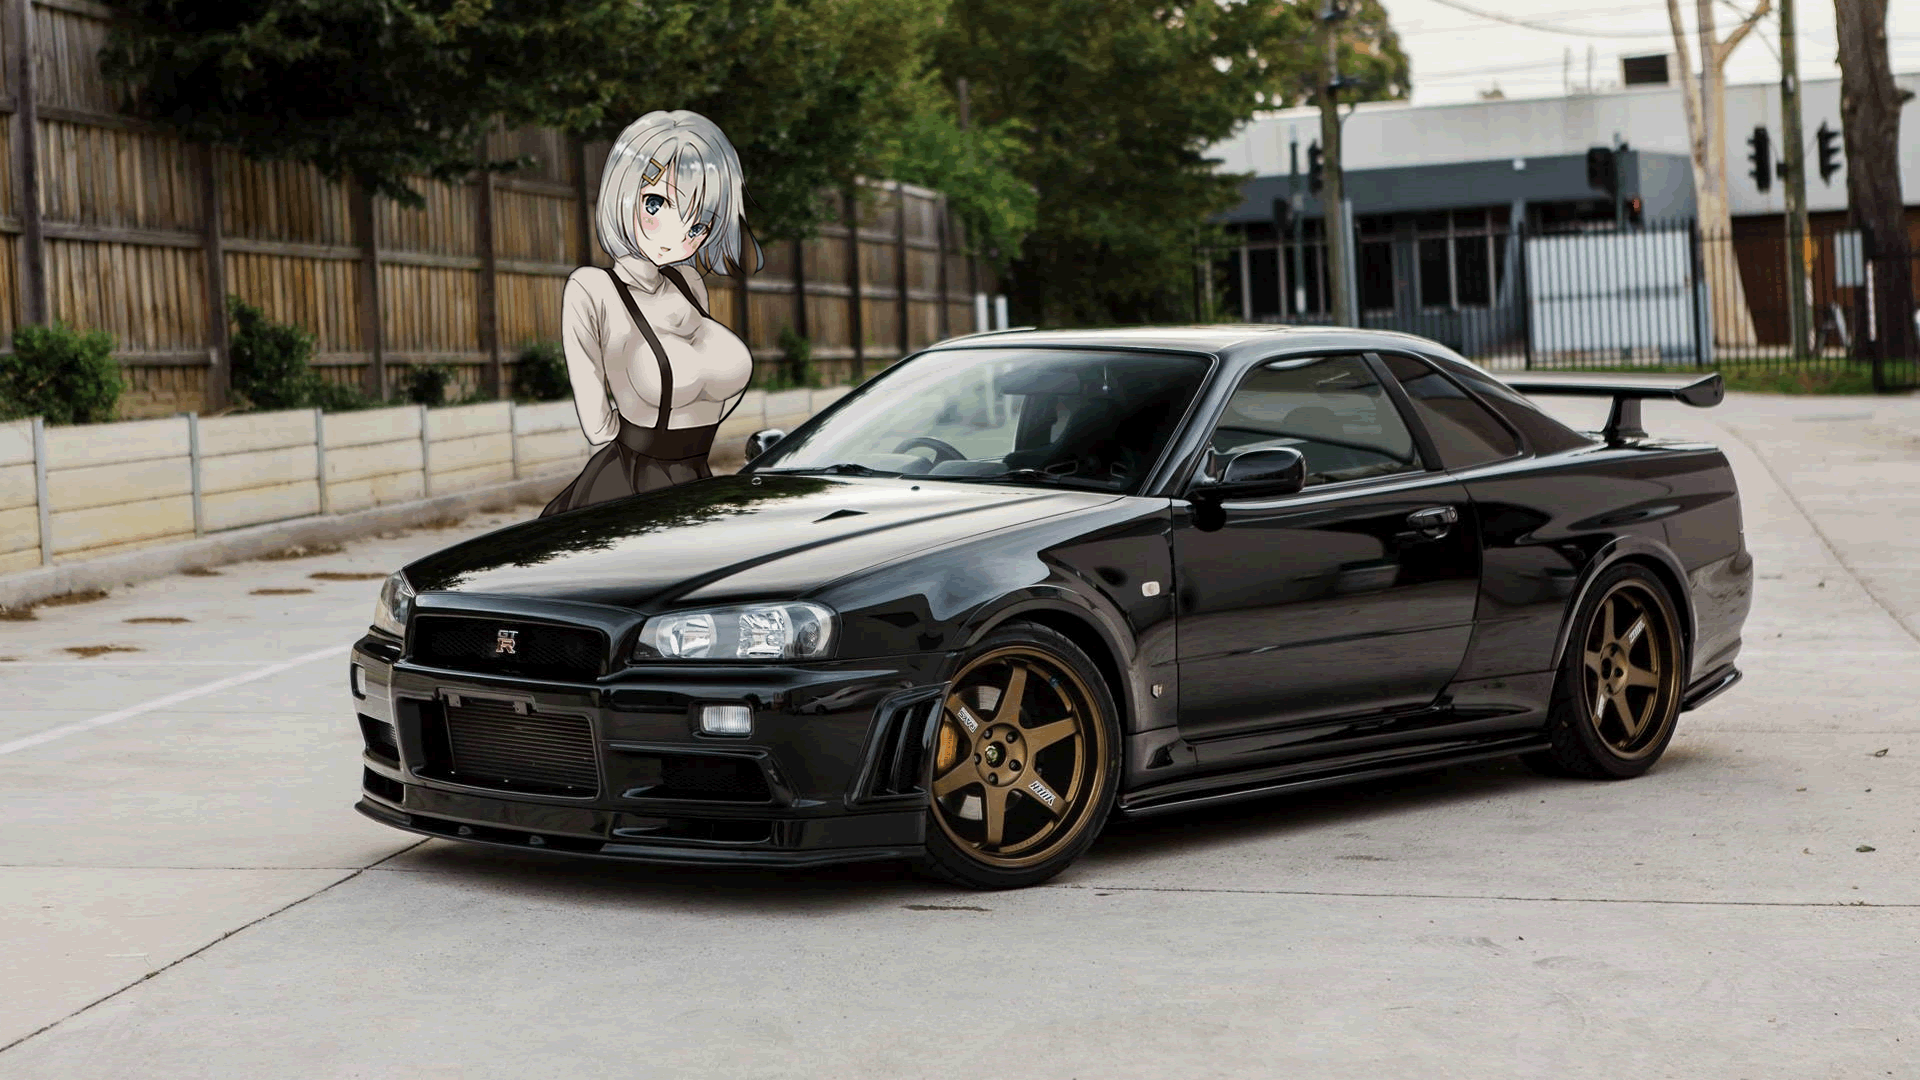 jdm cars and girls wallpaper